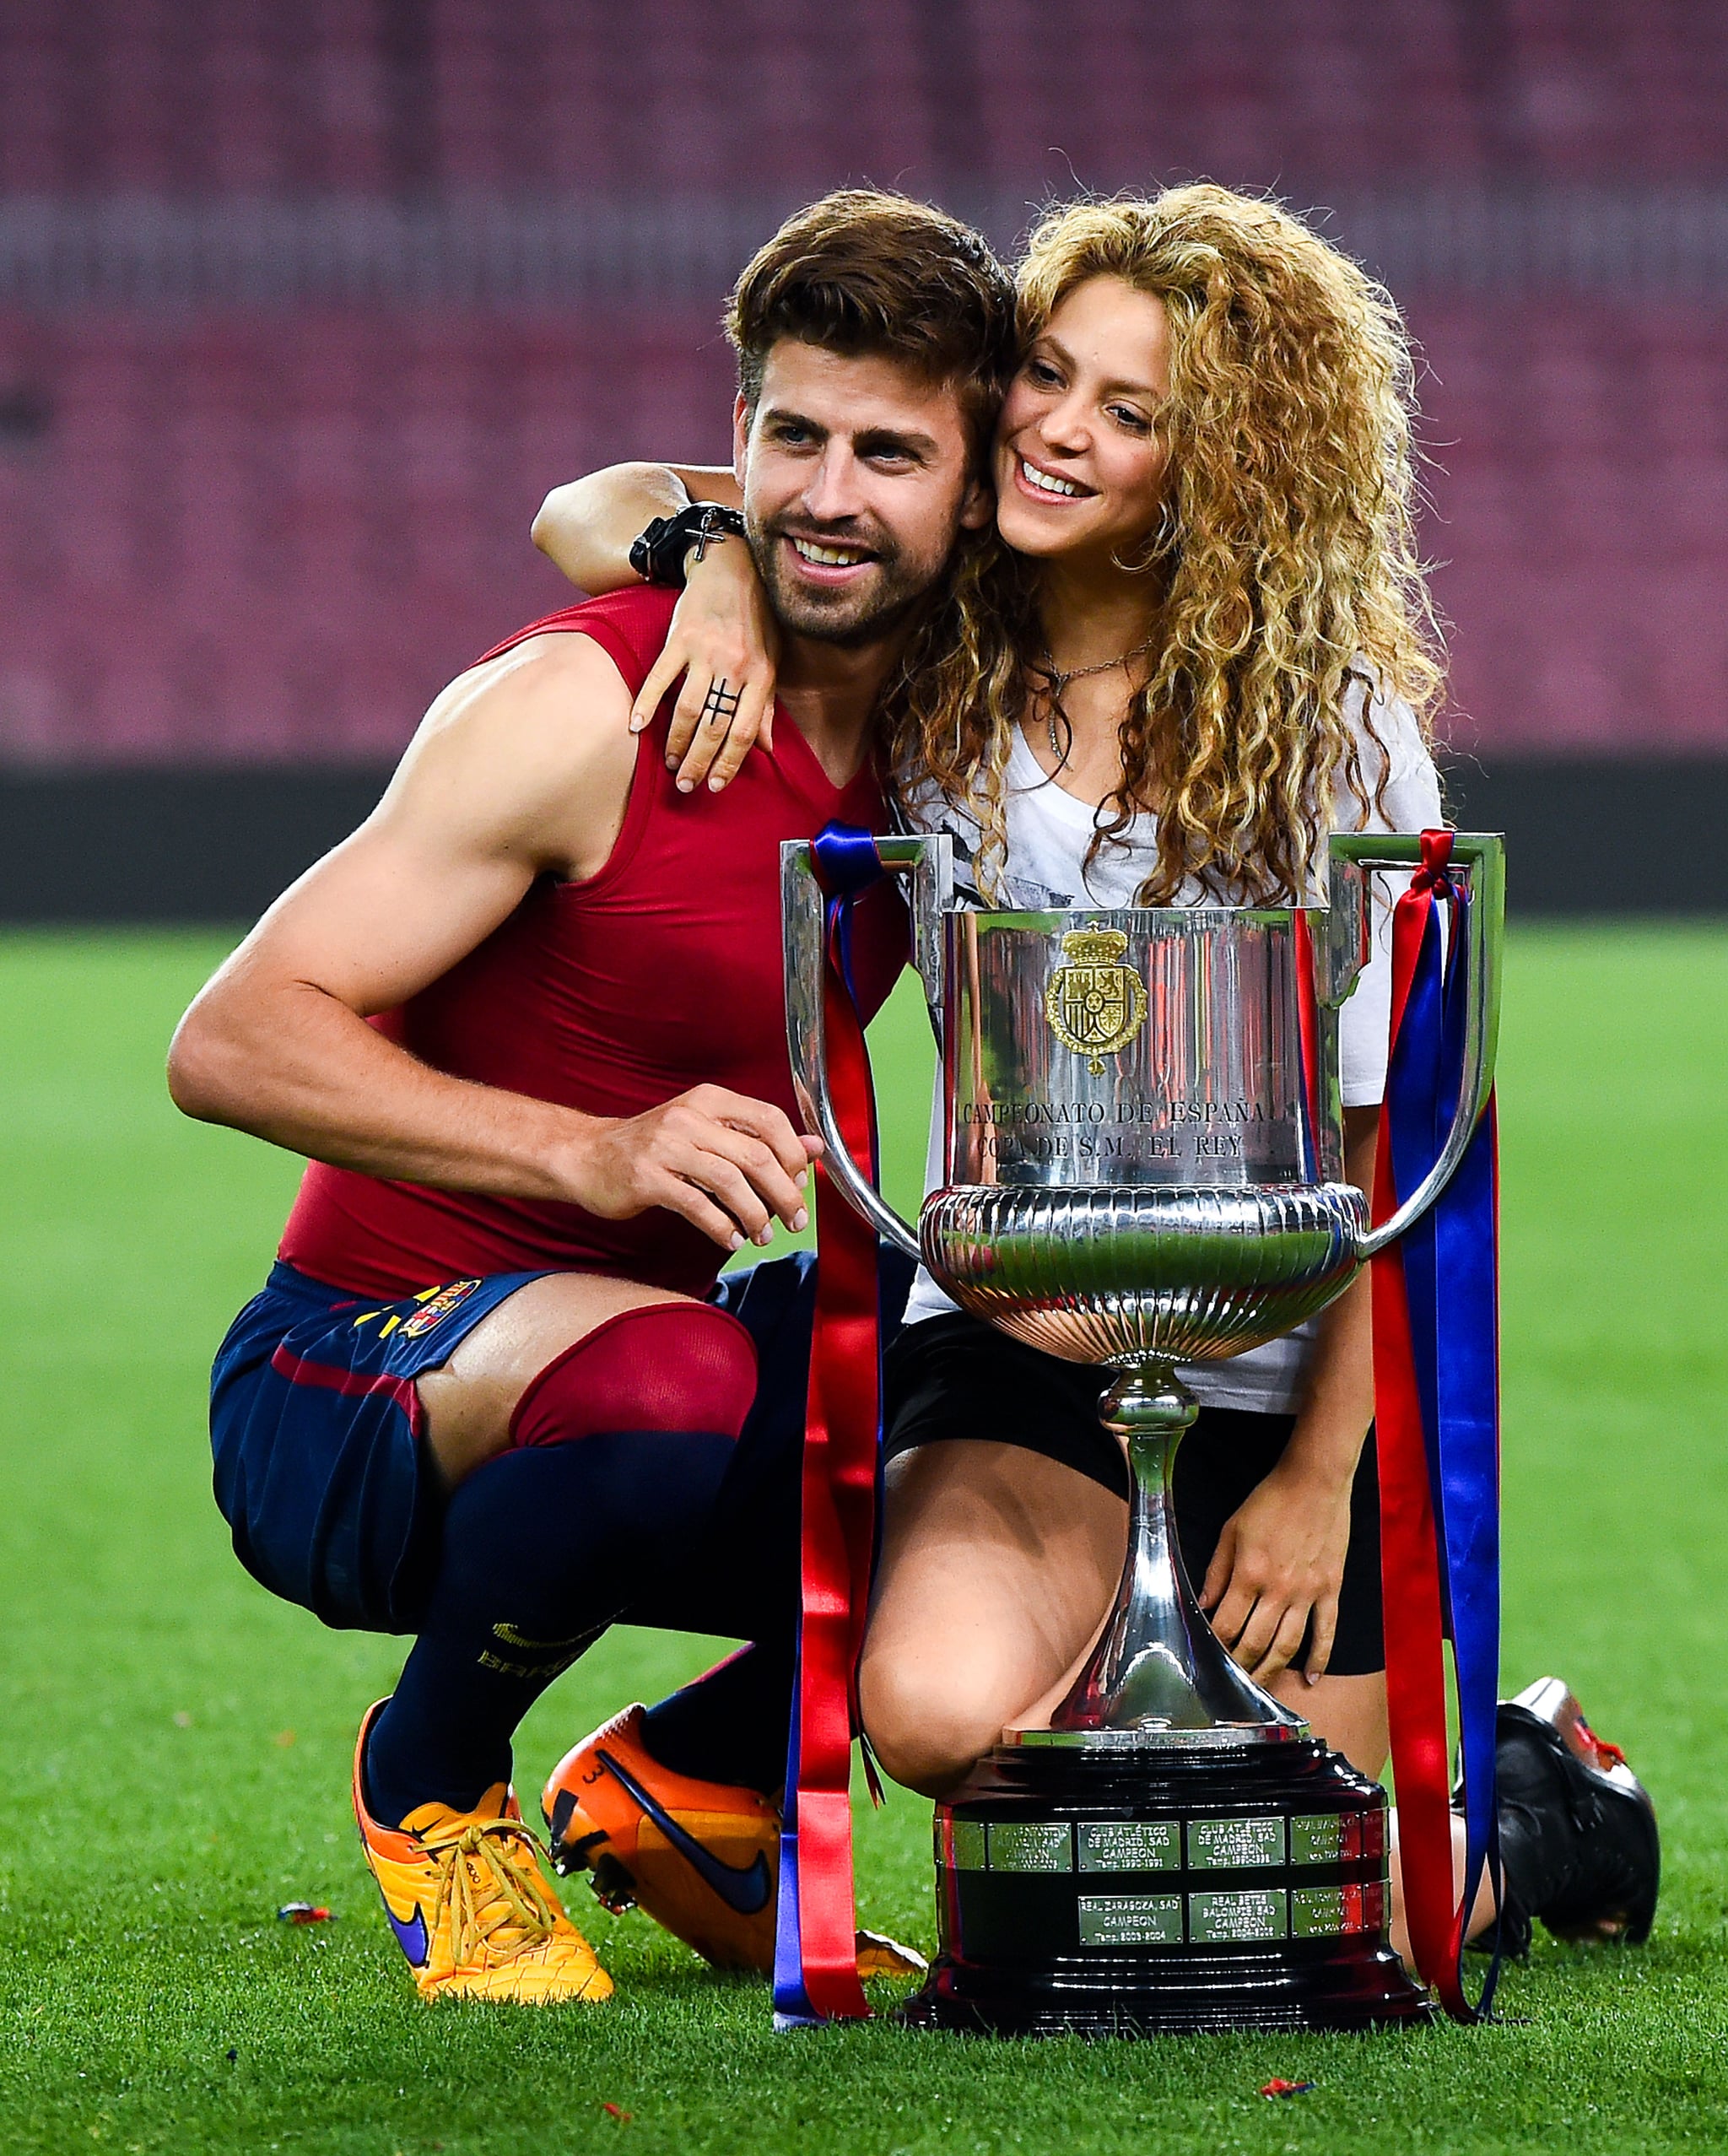 BARCELONA, SPAIN - MAY 30: Gerard Pique of FC Barcelona and Shakira pose with the trophy after FC Barcelona won the Copa del Rey final match against Athletic Club at Camp Nou on May 30, 2015 in Barcelona, ​​Spain .  (Photo by David Ramos/Getty Images)